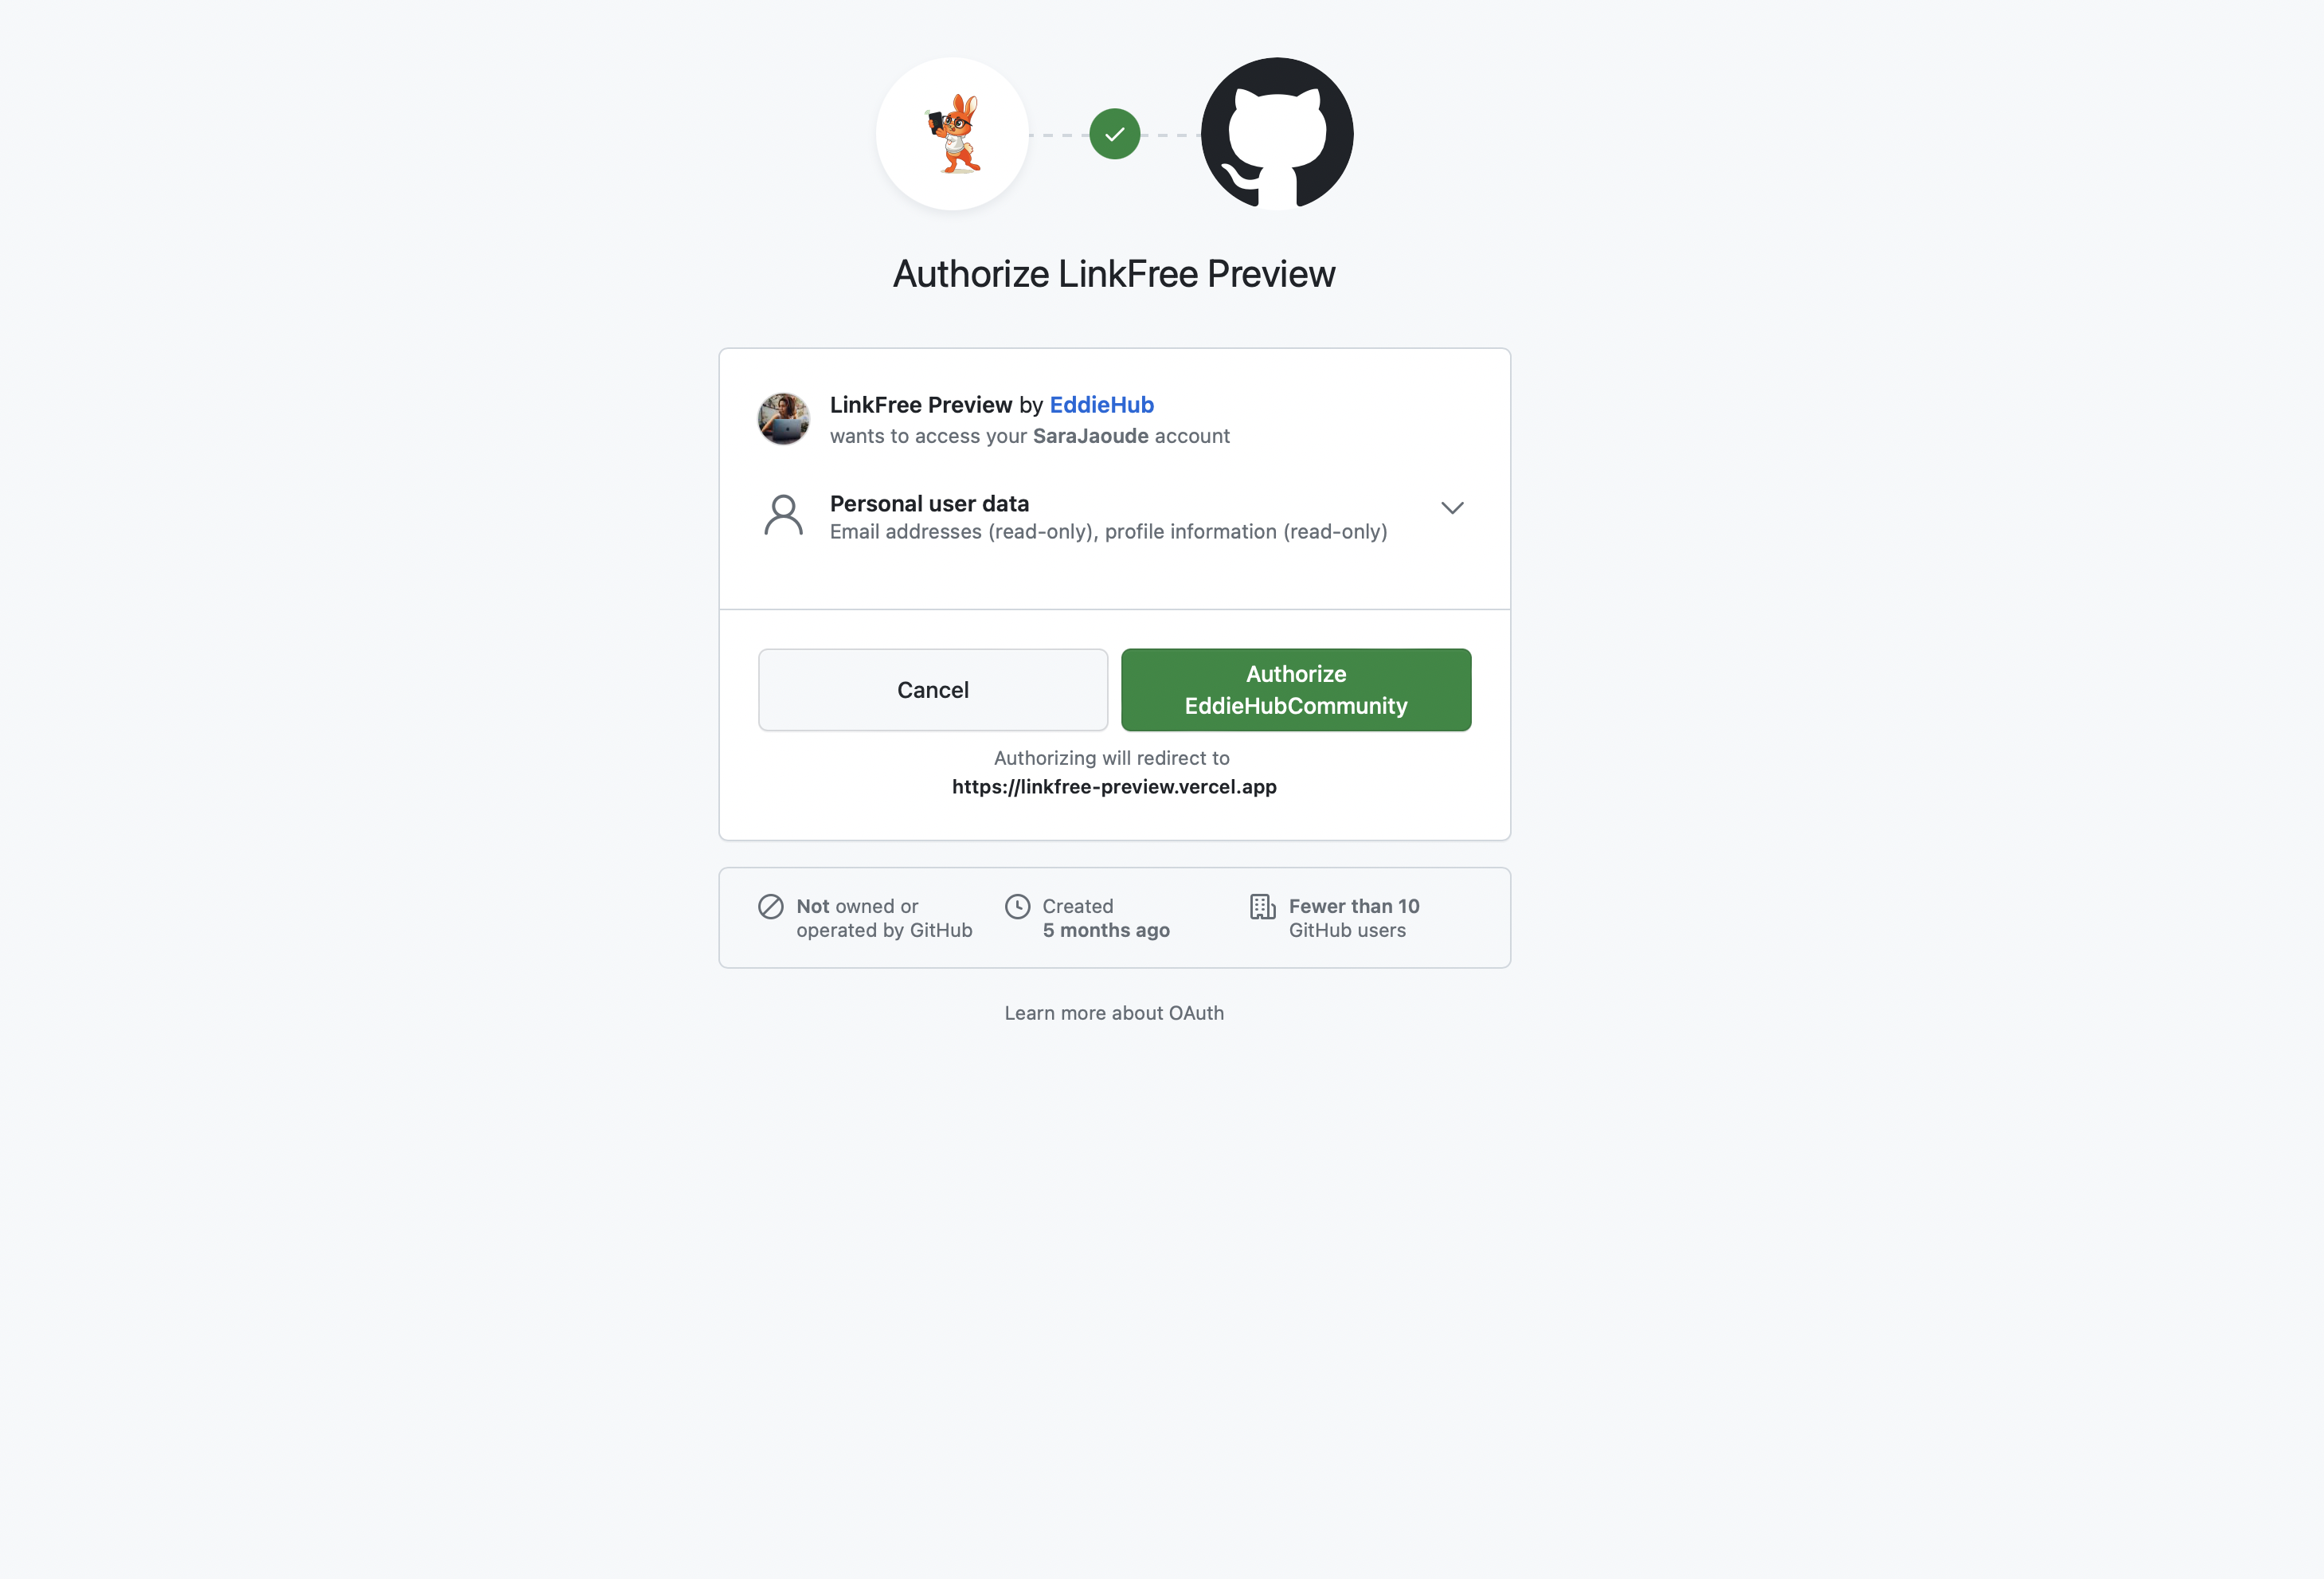 GitHub log in page